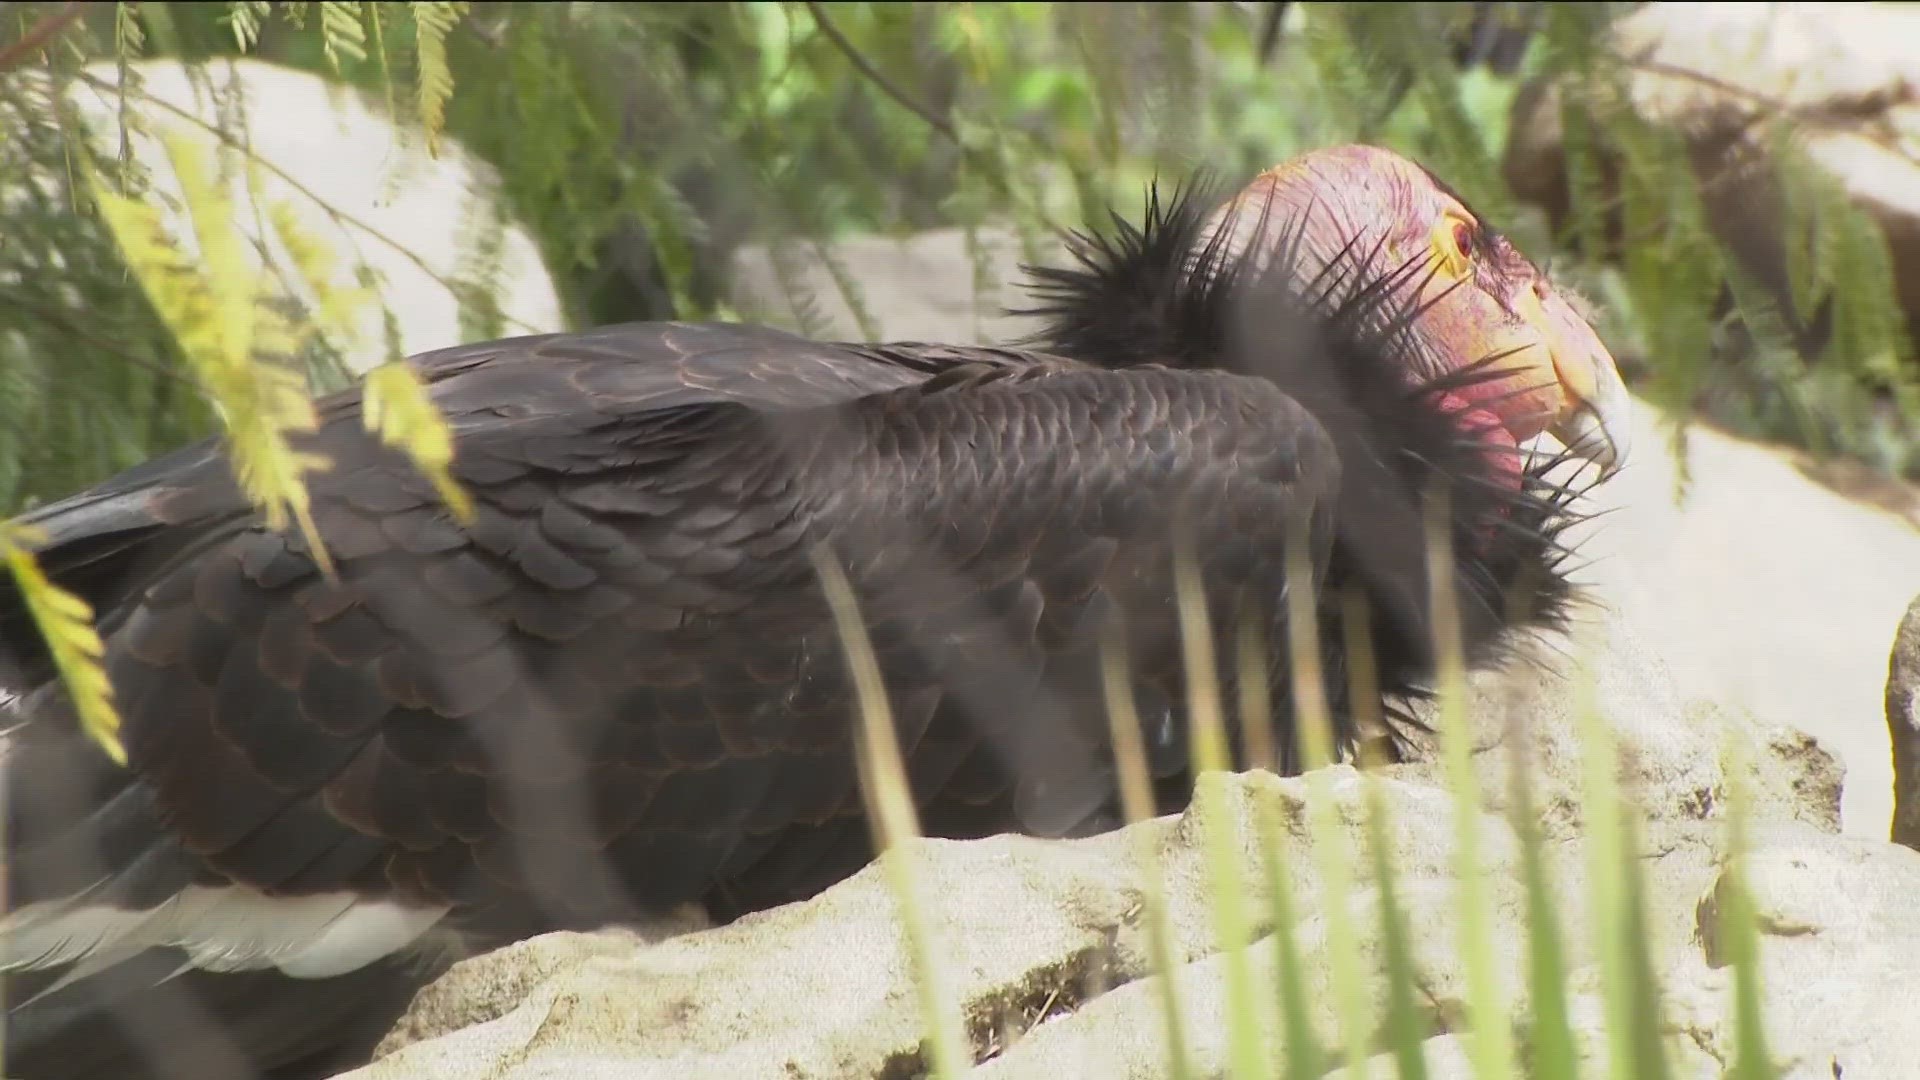 Forty years ago there were only 22 California Condors alive and now there is somewhere around 560